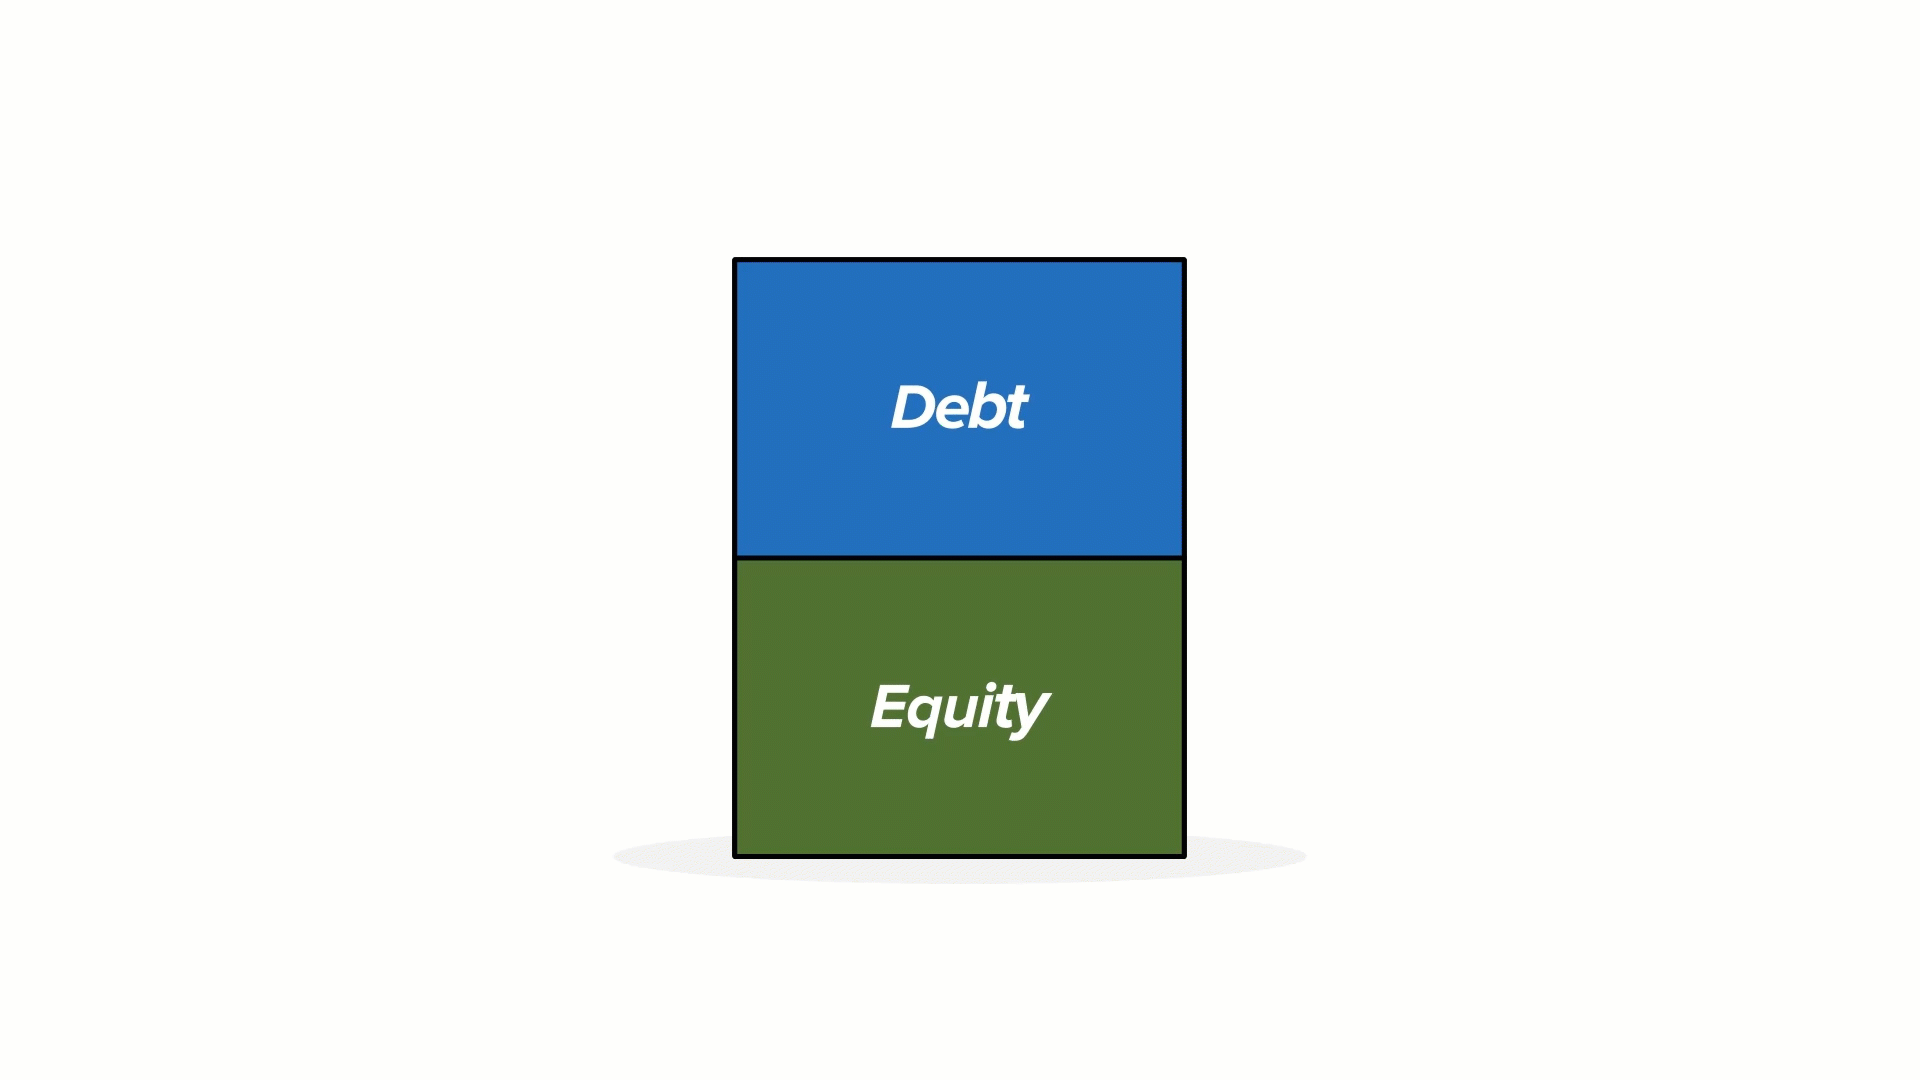 An animation showing how a company issues shares of stock in return for dividends and ownership